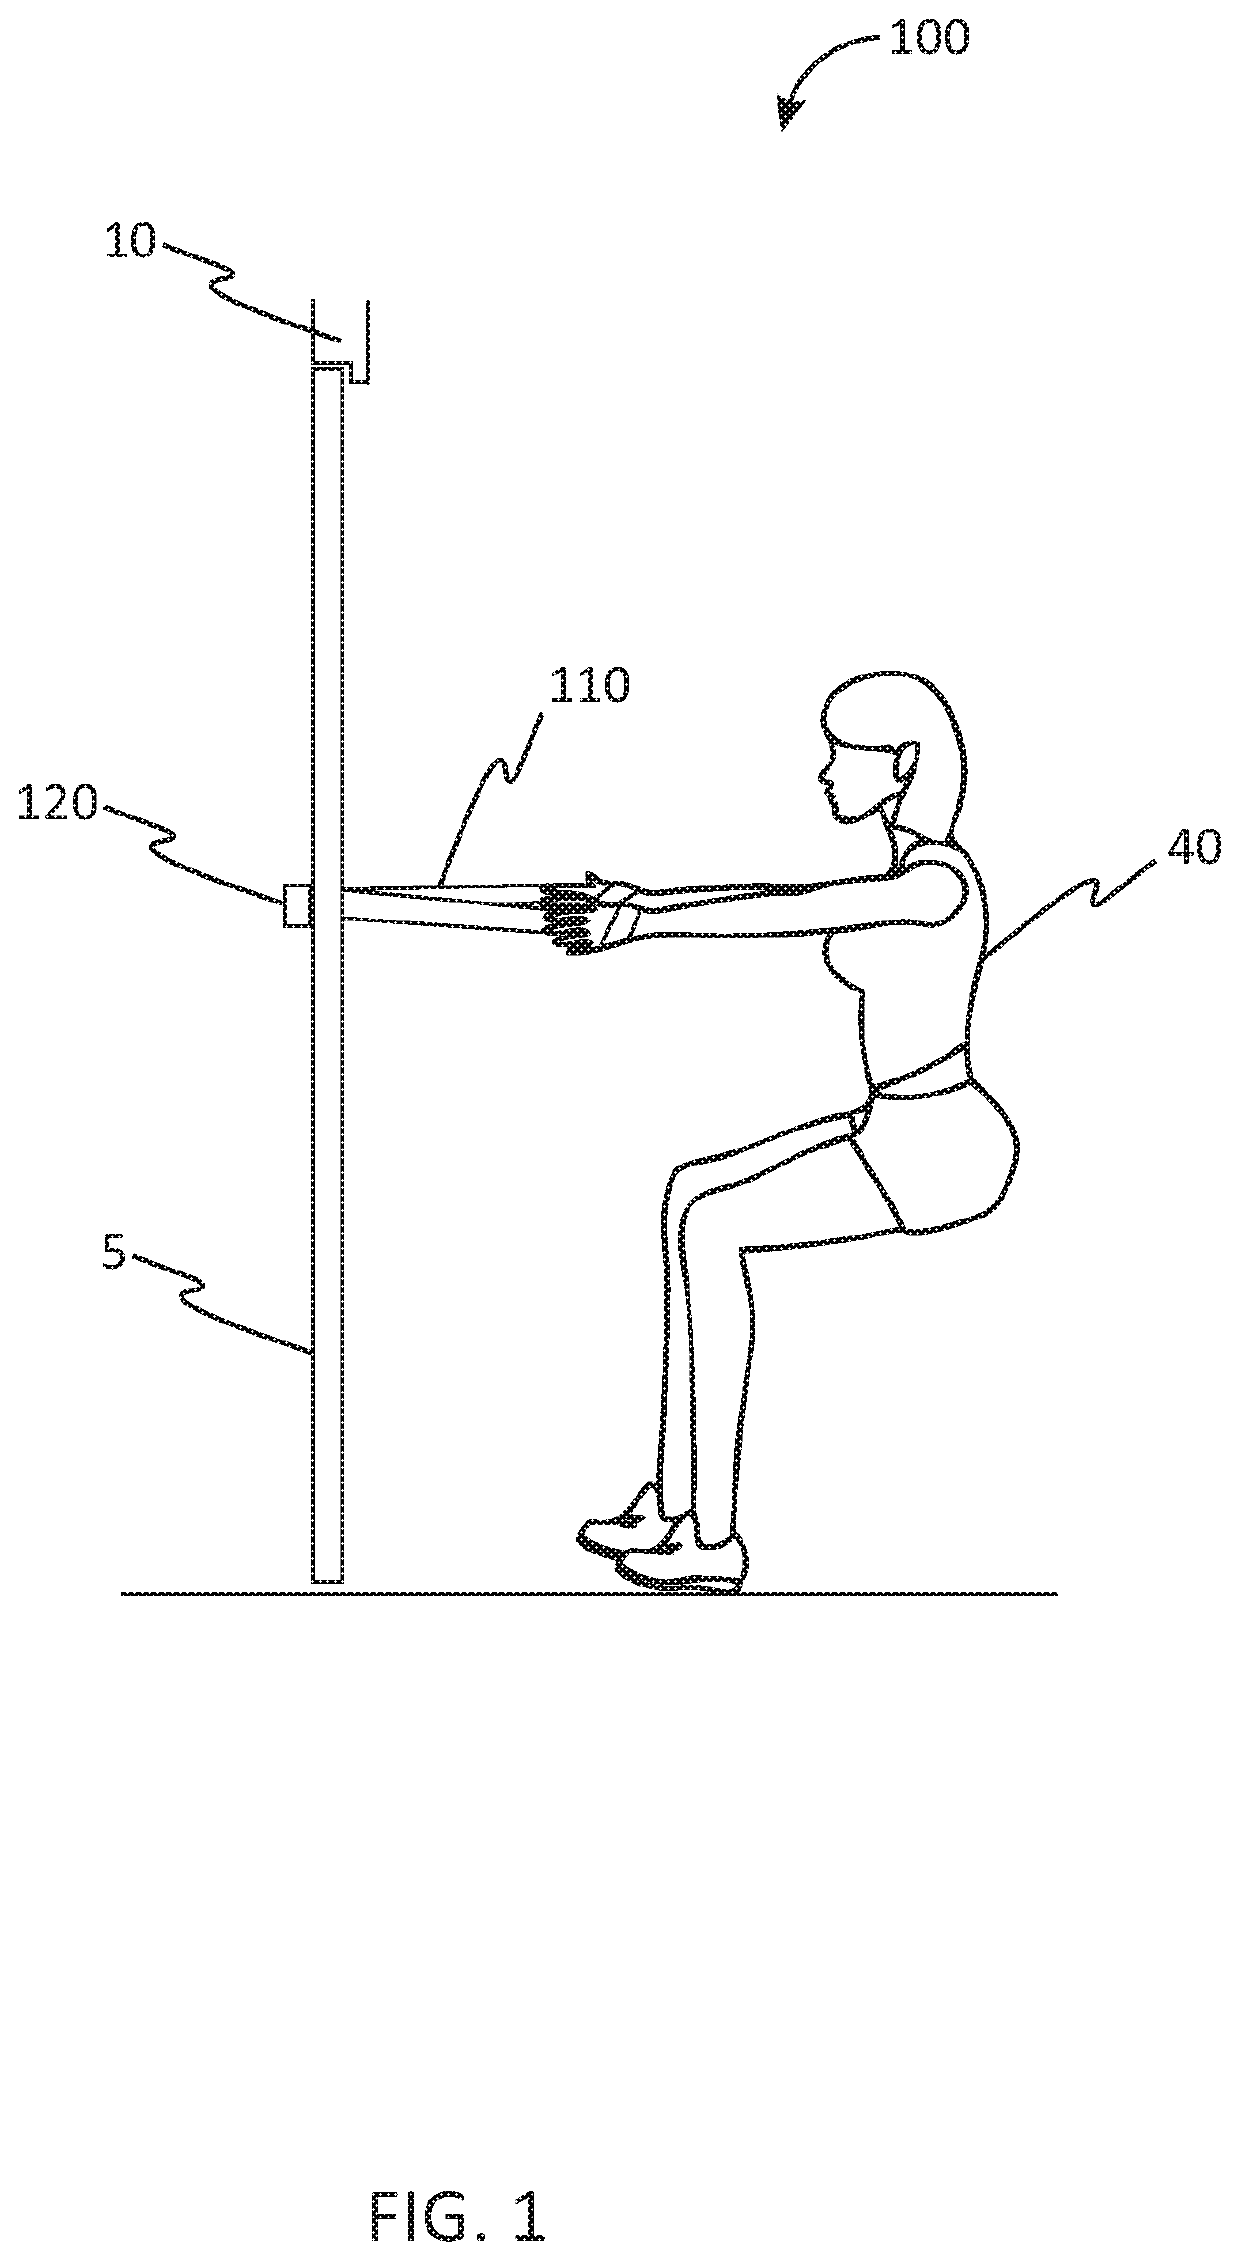 Gluteal muscle exercise device